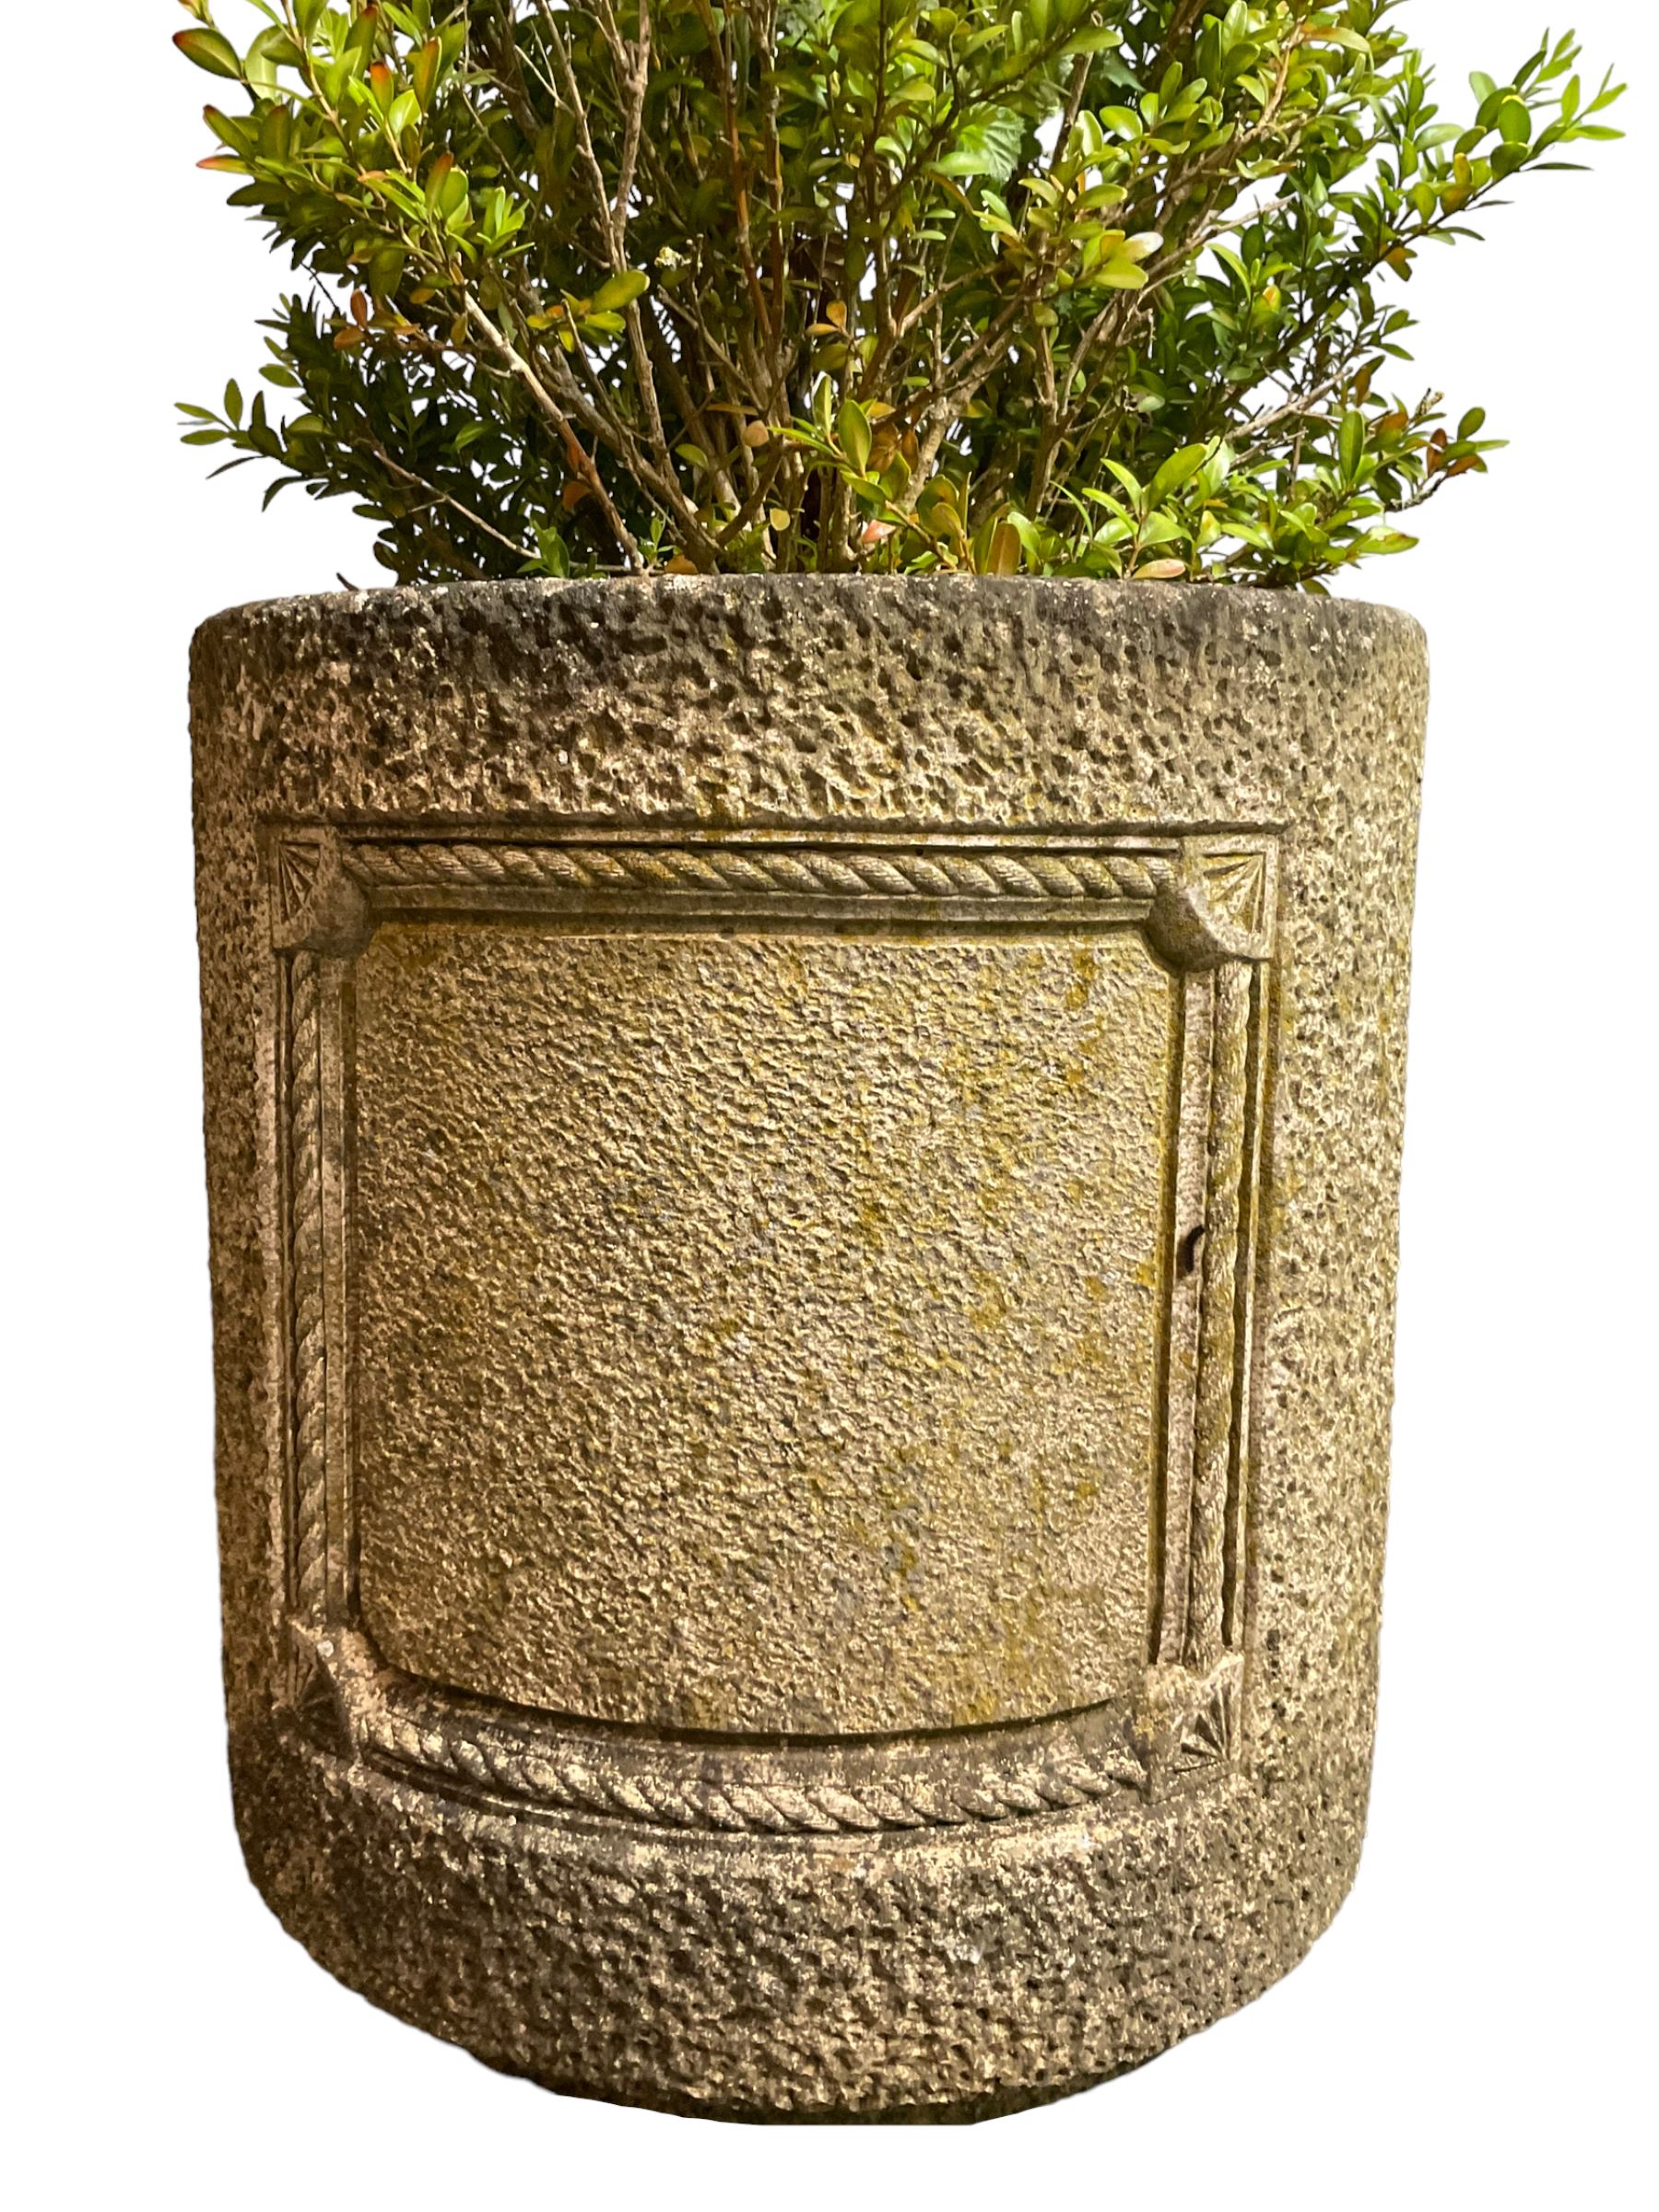 Pair of cast stone cylindrical planters - Image 4 of 5